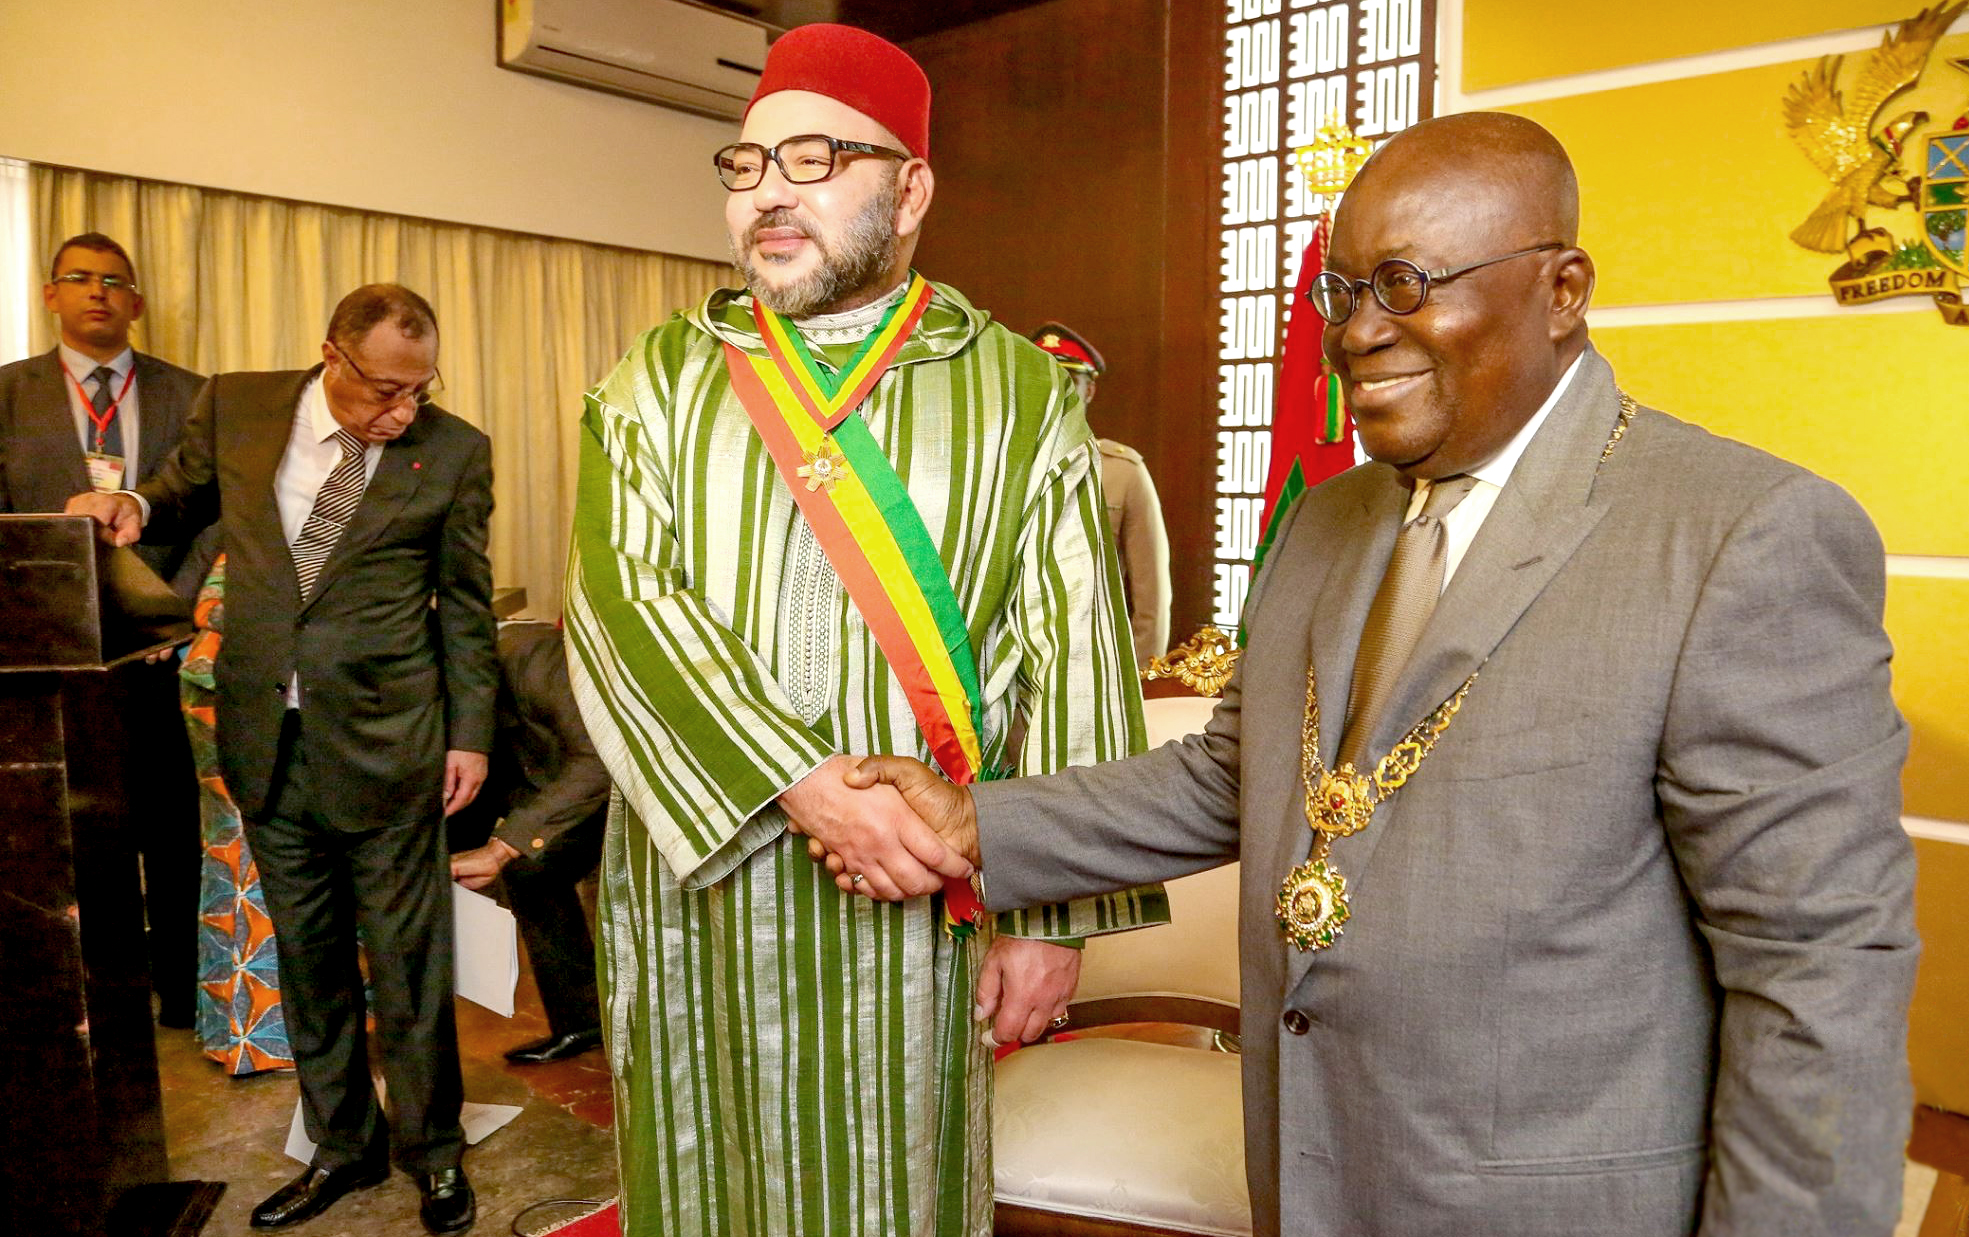 Imane Ouaadil: "I am confident that the ongoing dynamic between Morocco and Ghana will bring our two countries to work together and explore new and untapped opportunities for the sake of our peoples’ prosperity and well being."